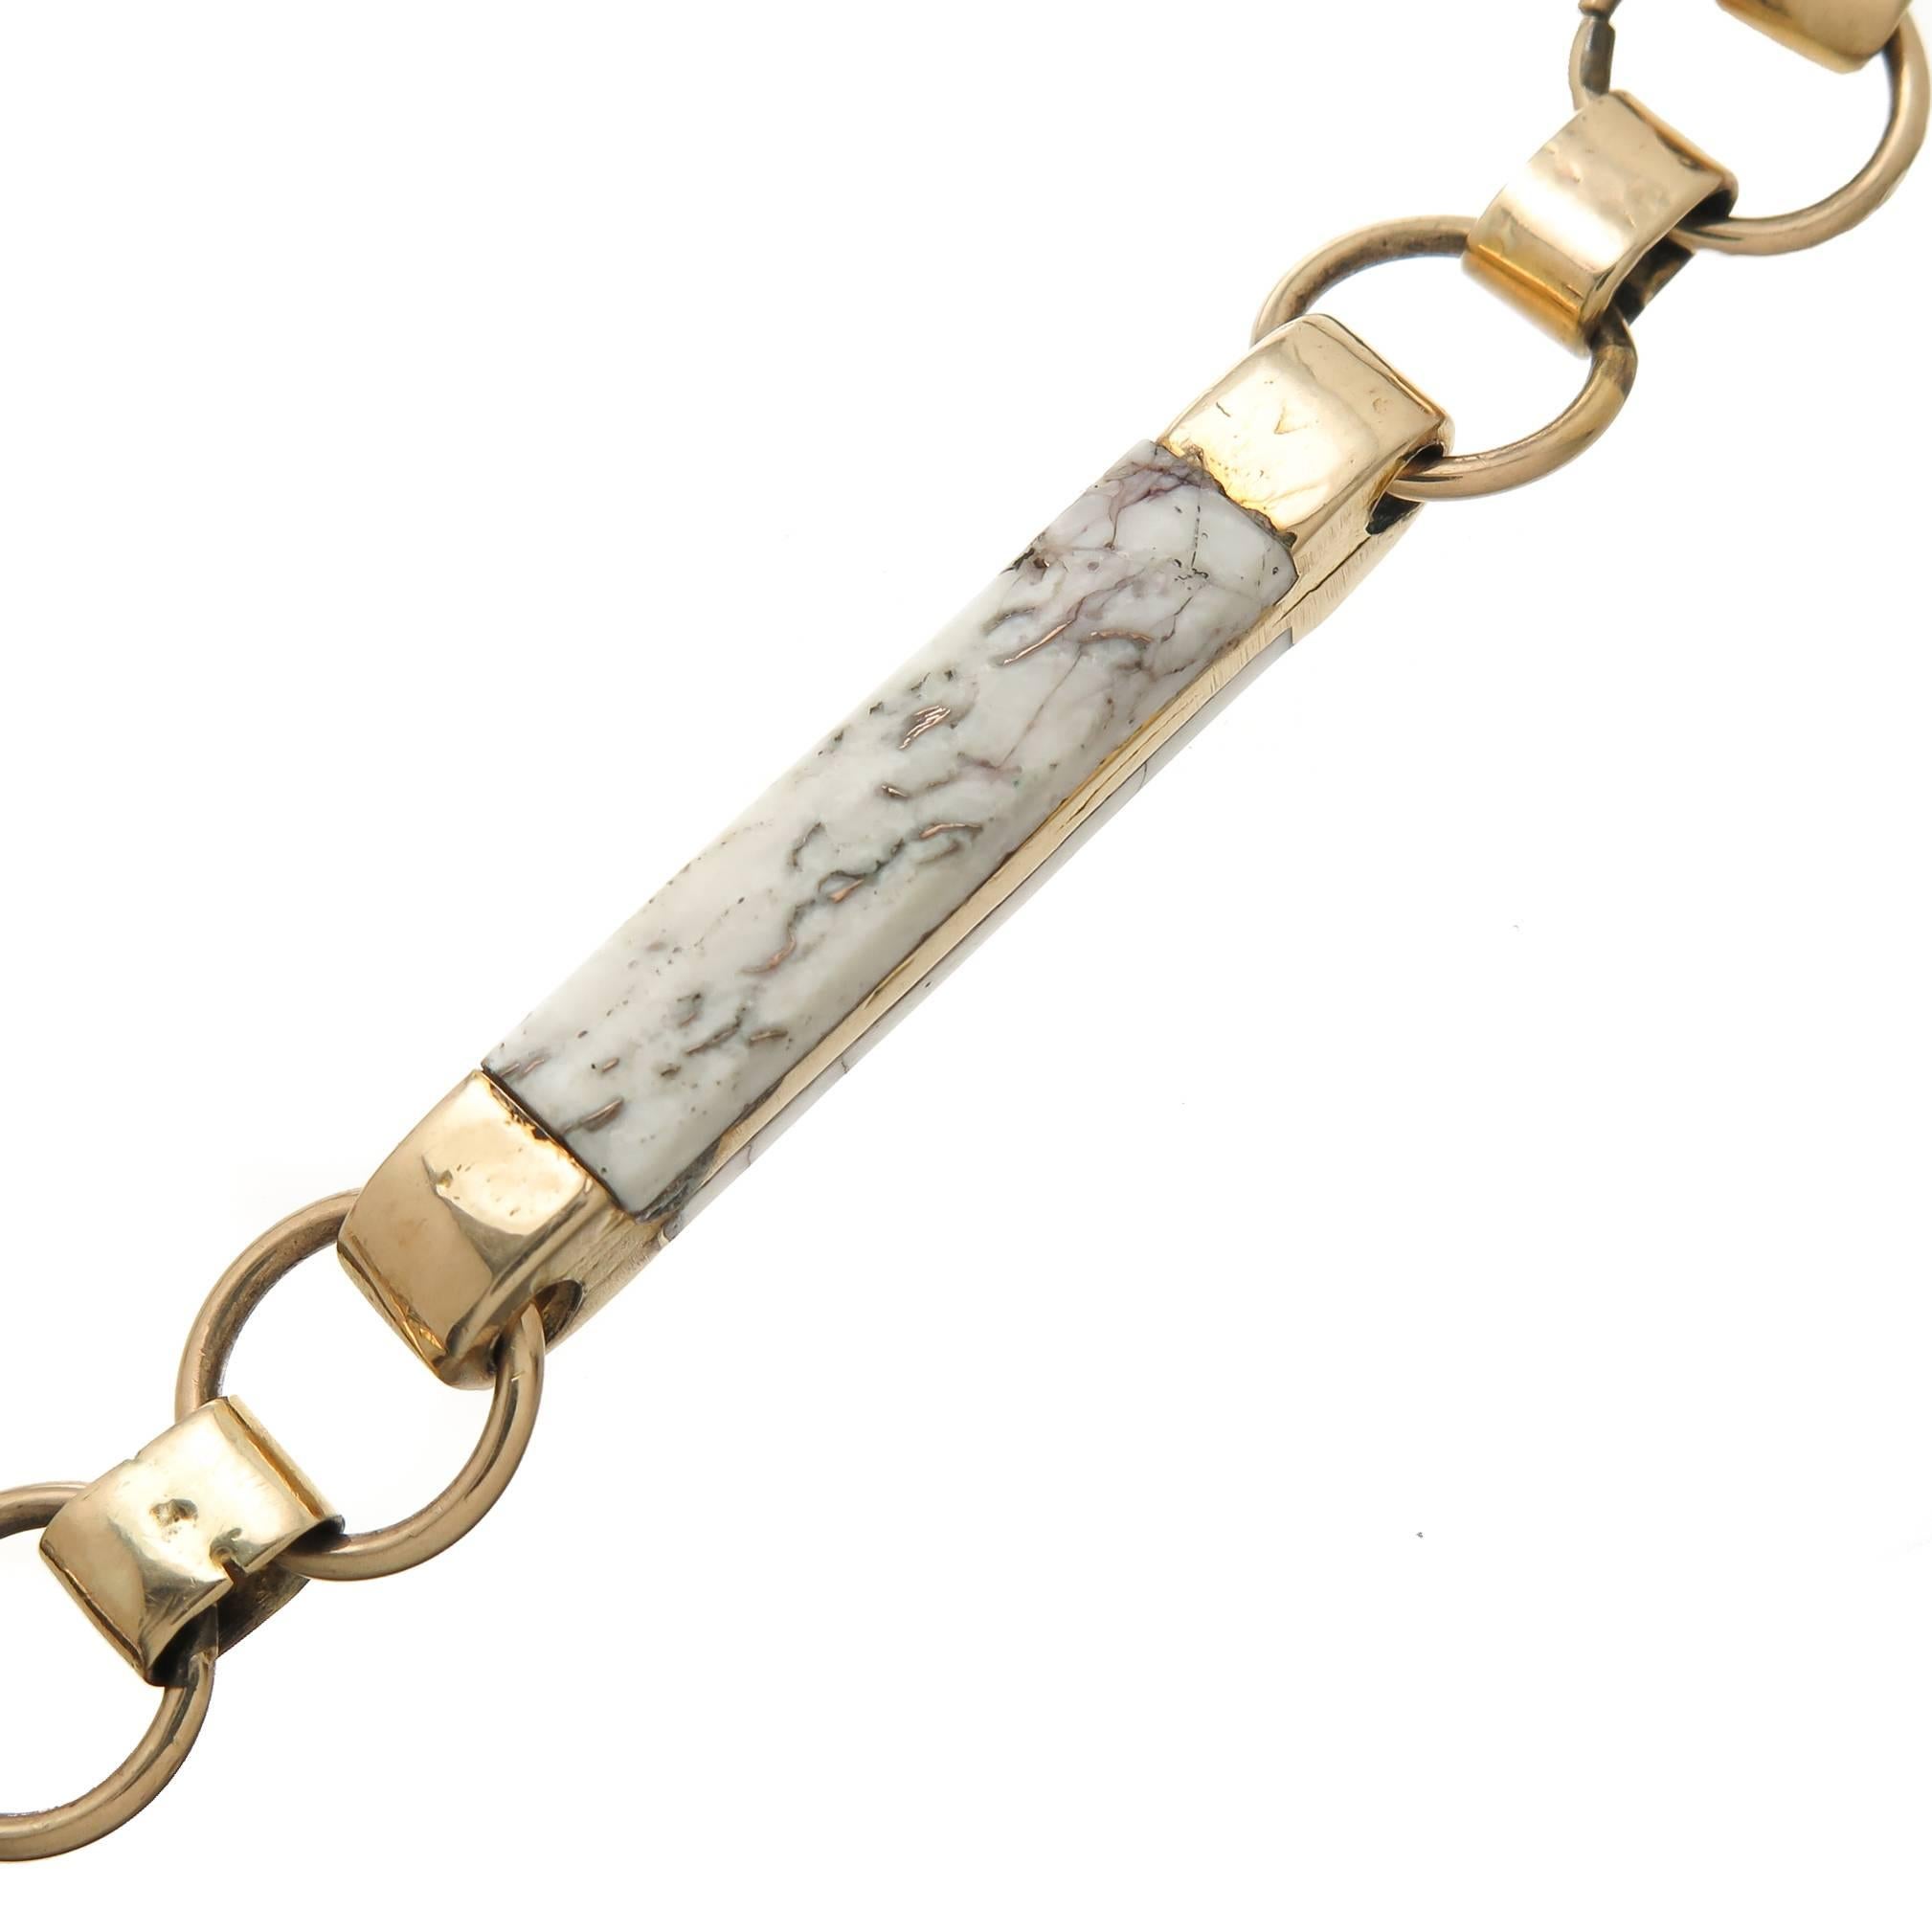 Circa 1870 California Gold Rush, 14K yellow gold and Gold Quartz double sided watch fob chain, Measuring 14 inch in length with links measuring 1/4 inch wide.